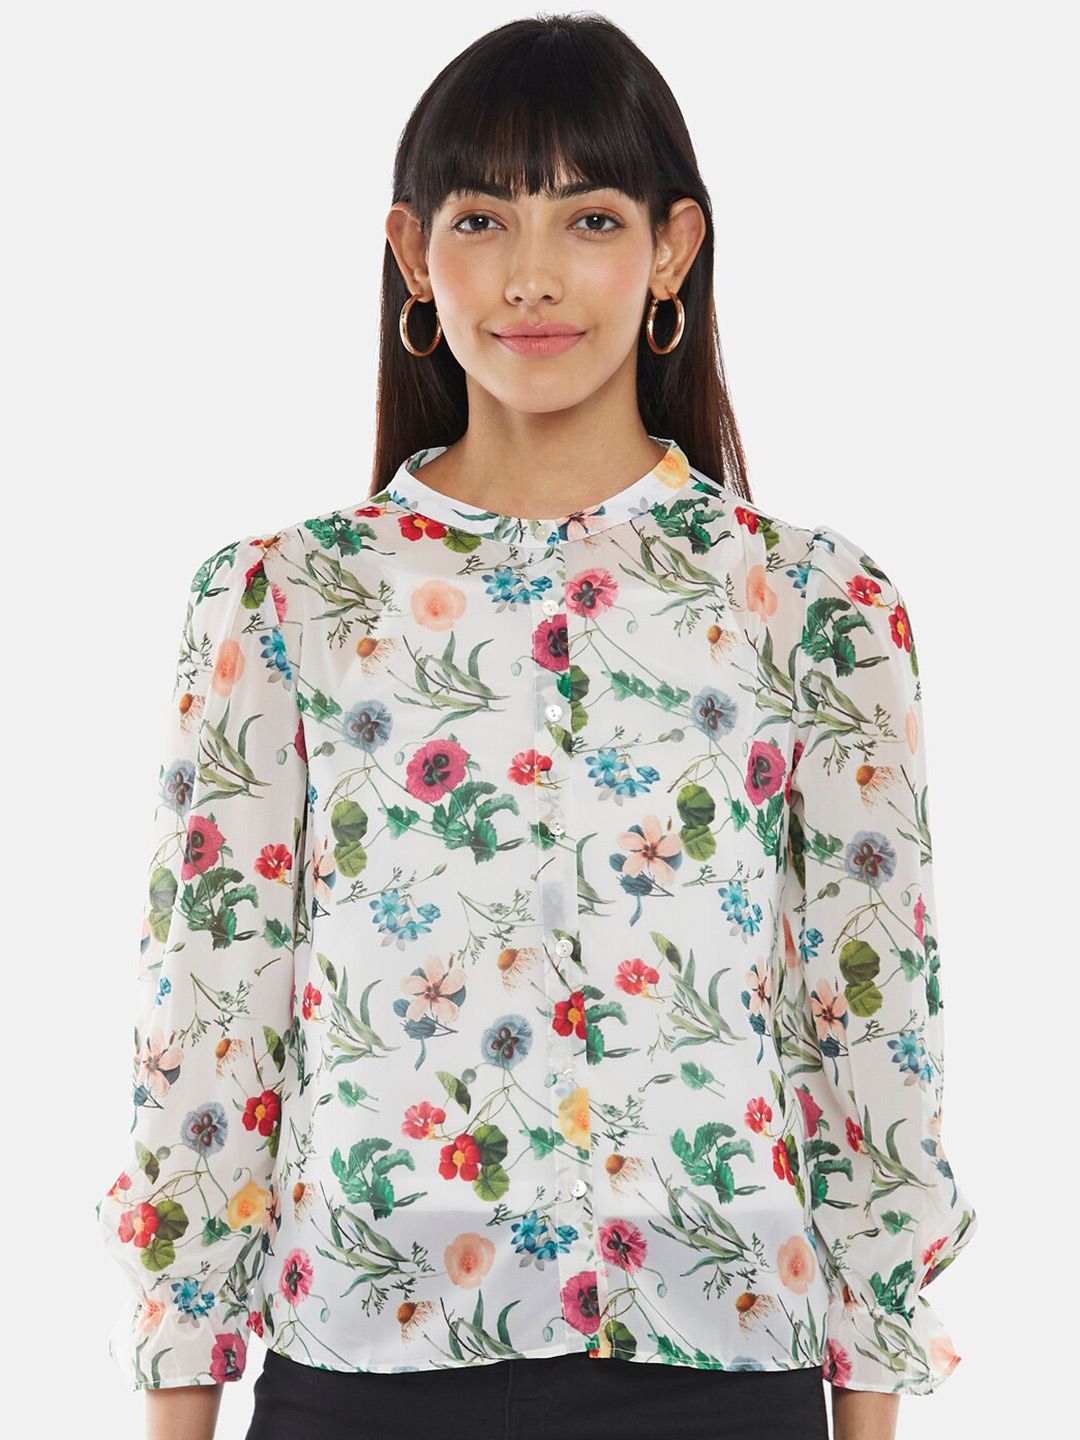 Honey by Pantaloons Off White Floral Print Mandarin Collar Top Price in India